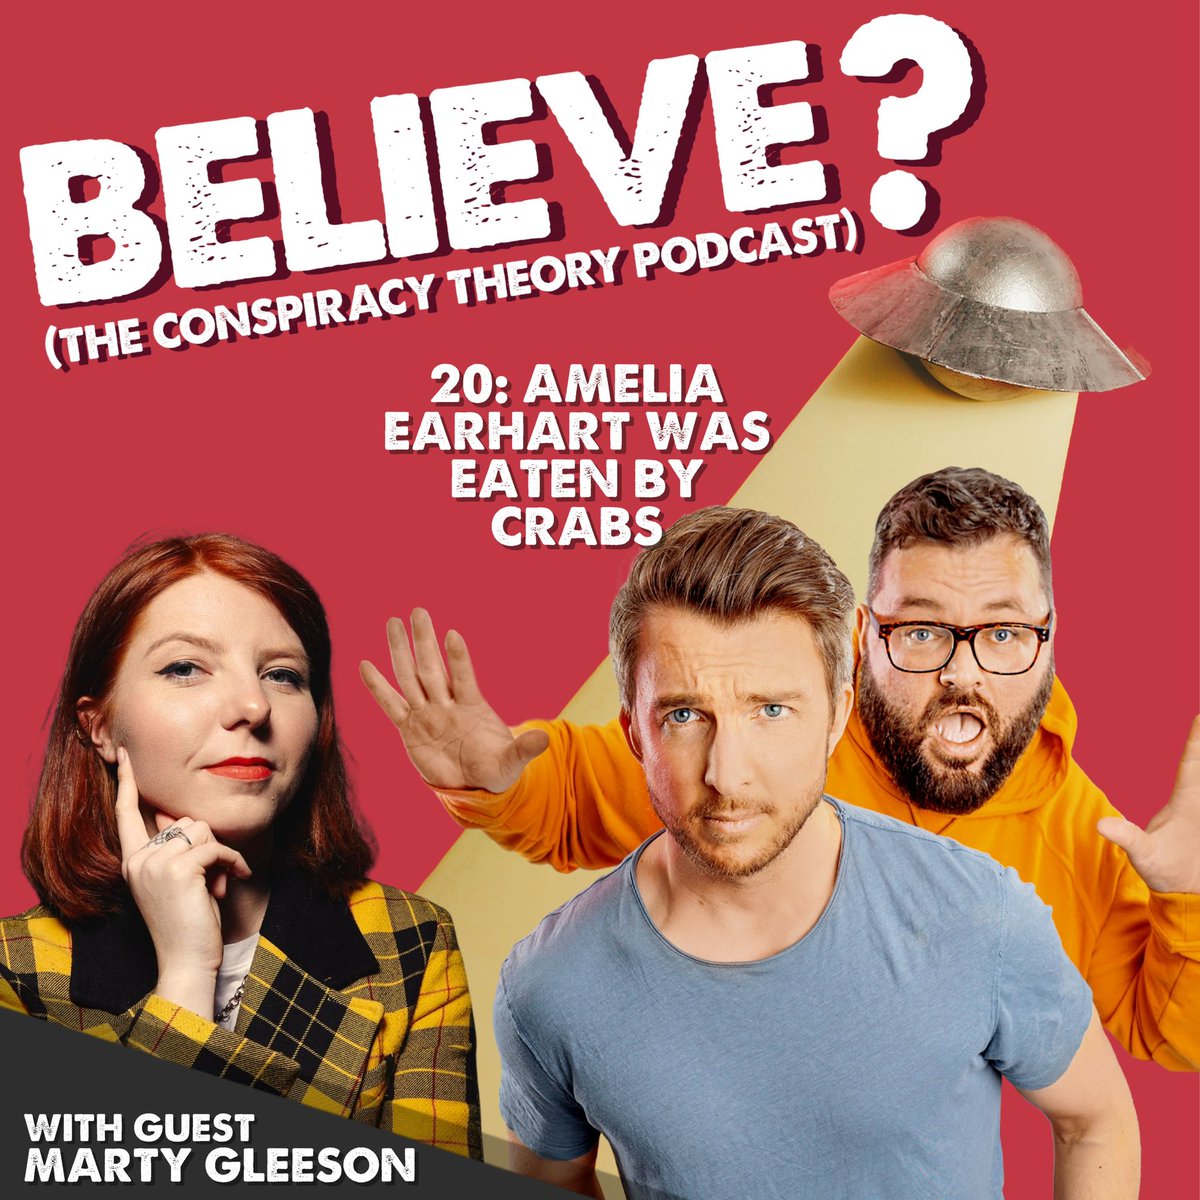 Was Amelia Earhart eaten by crabs? Episode 20 of Believe? The Conspiracy Theory Podcast is out now with our wonderful guest @martygleeson_. Listen or watch linktr.ee/believeconspir…
#ameliaearhart #crabs #believeconspiracypod